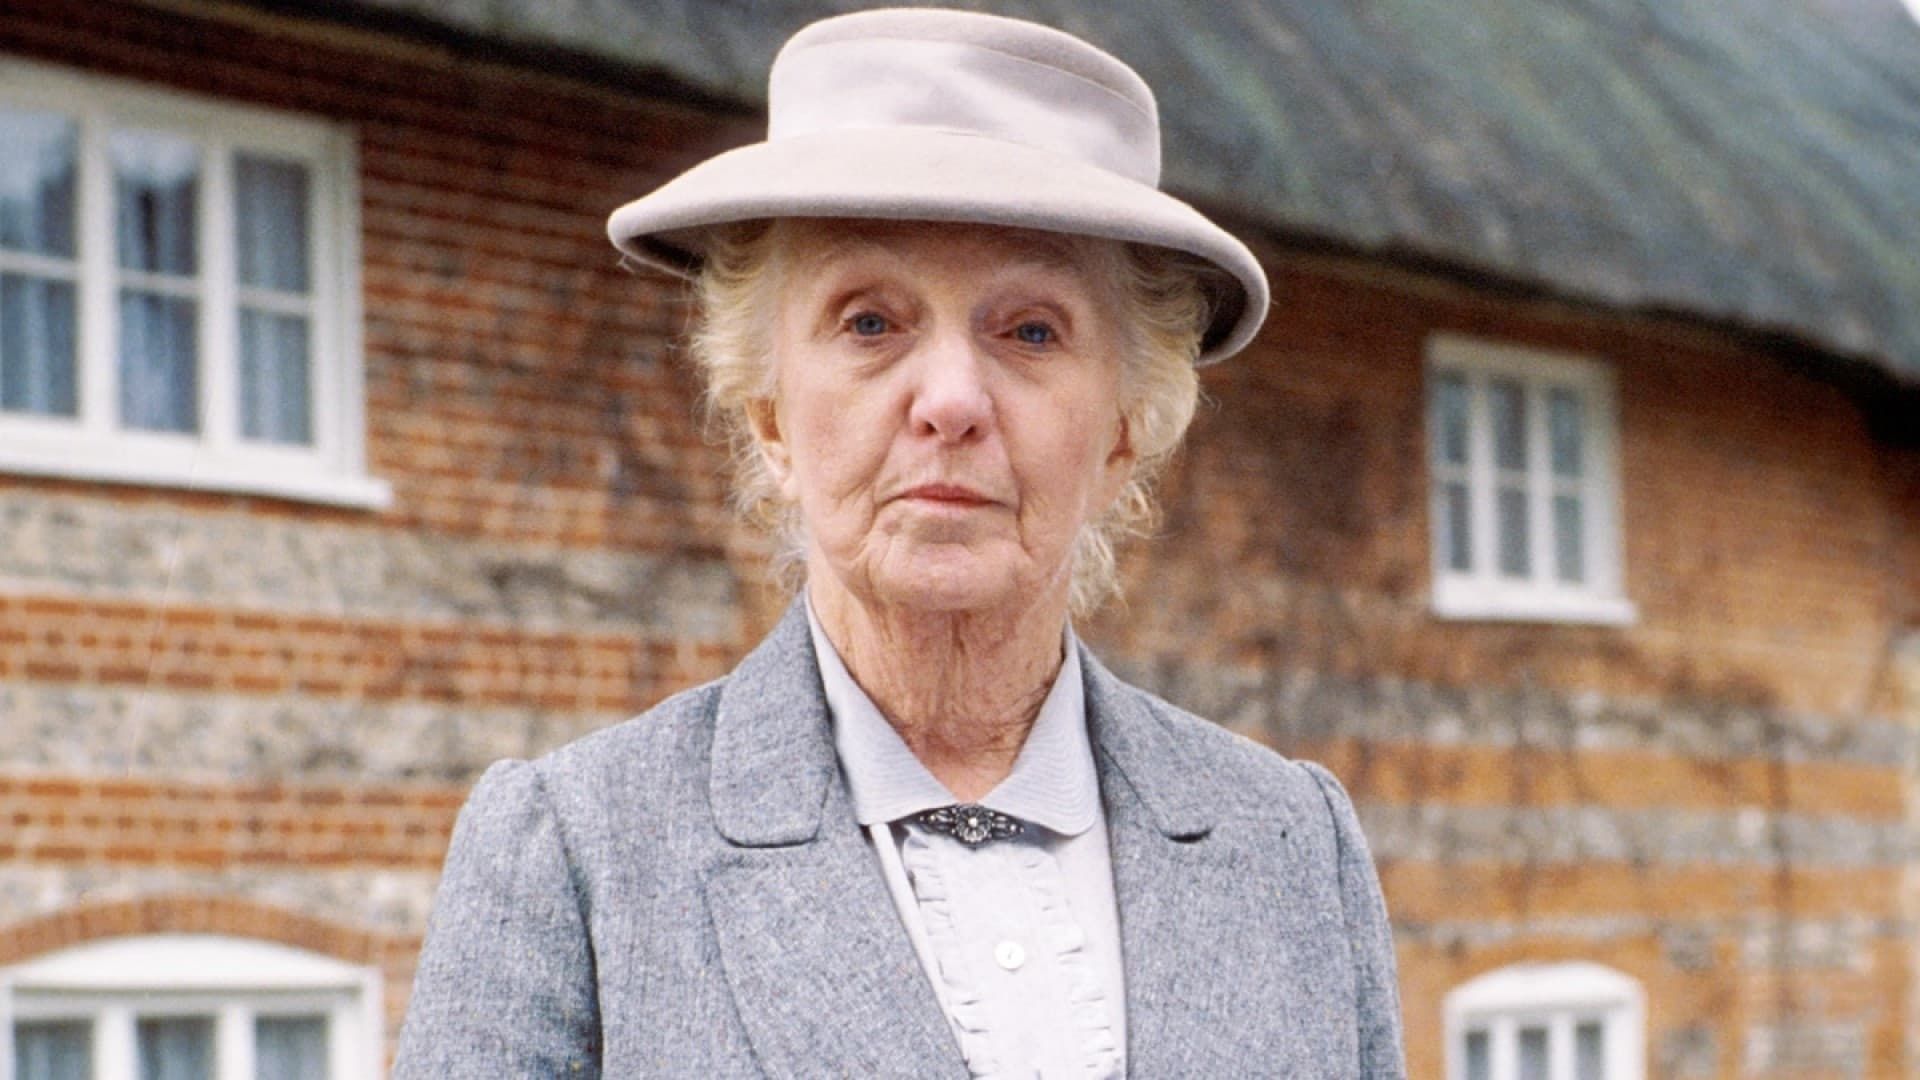 Miss Marple: The Body in the Library: Where to Watch and Stream Online